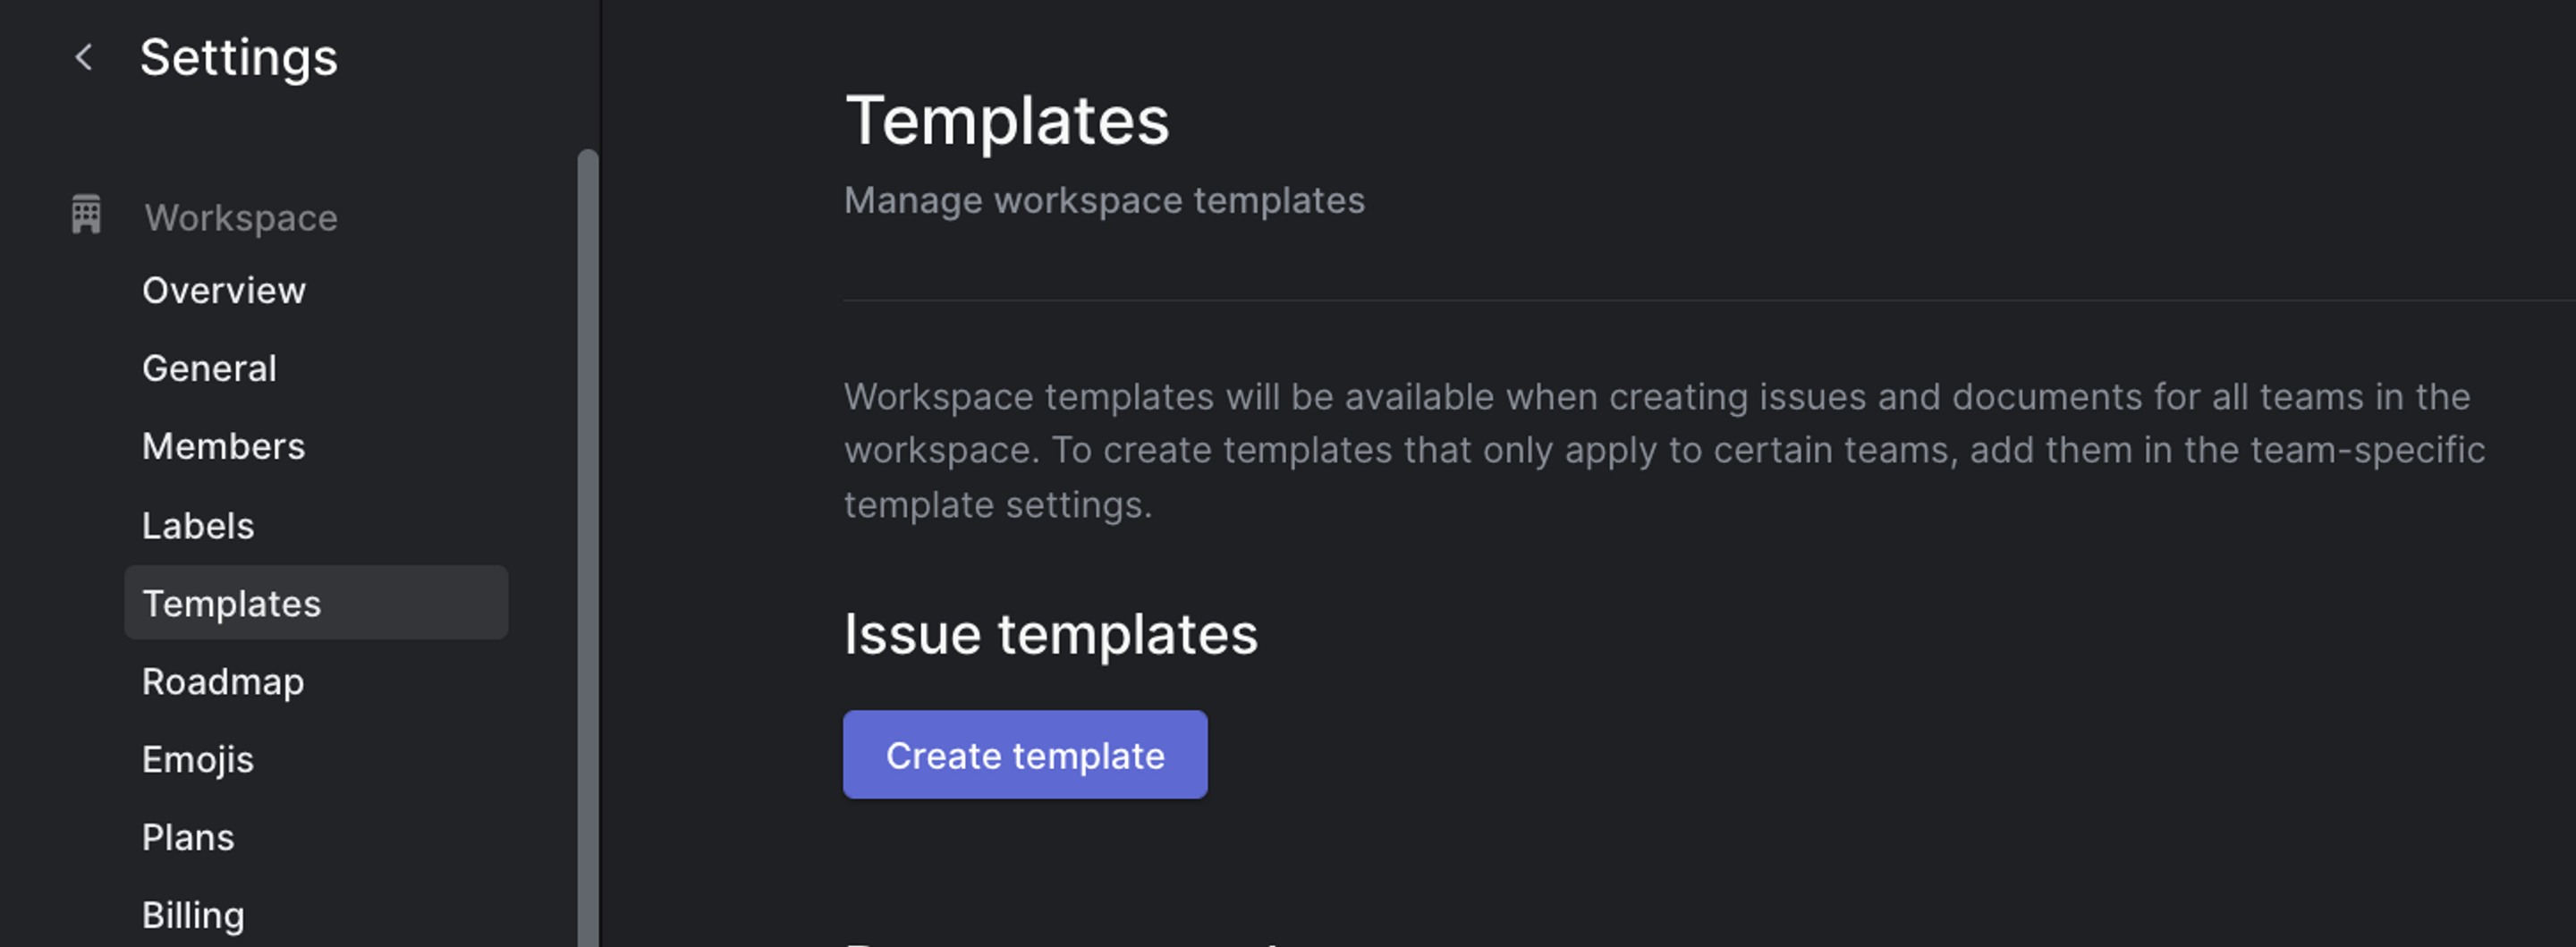 The settings page for Templates showing a button on how to create a template